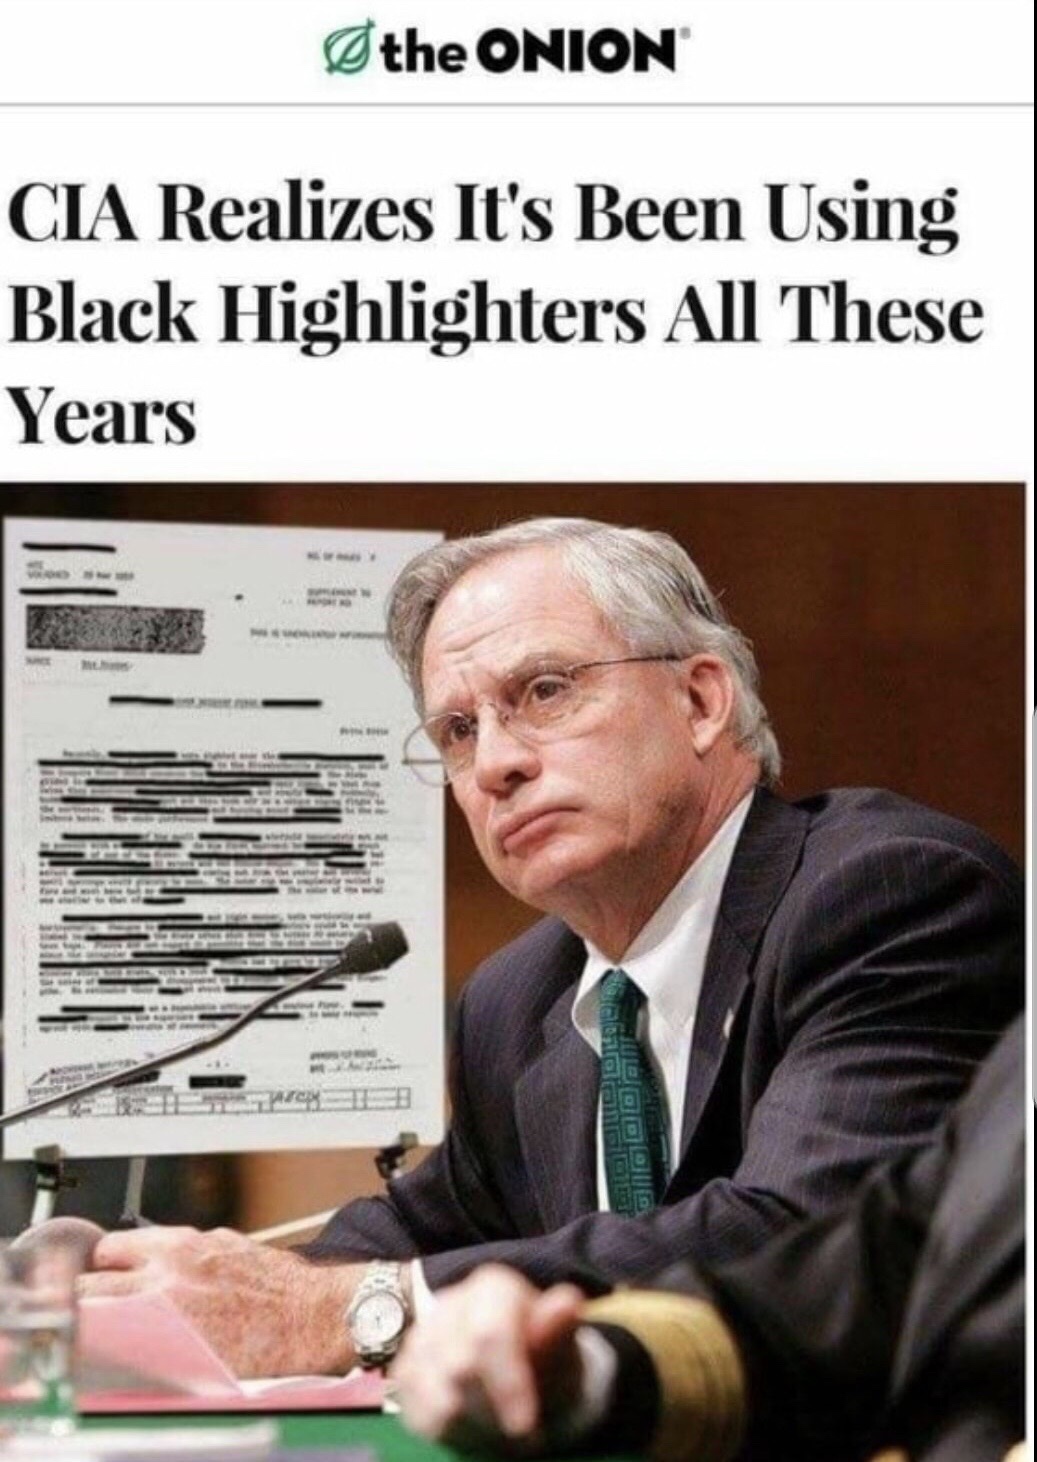 onion - the Onion Cia Realizes It's Been Using Black Highlighters All These Years